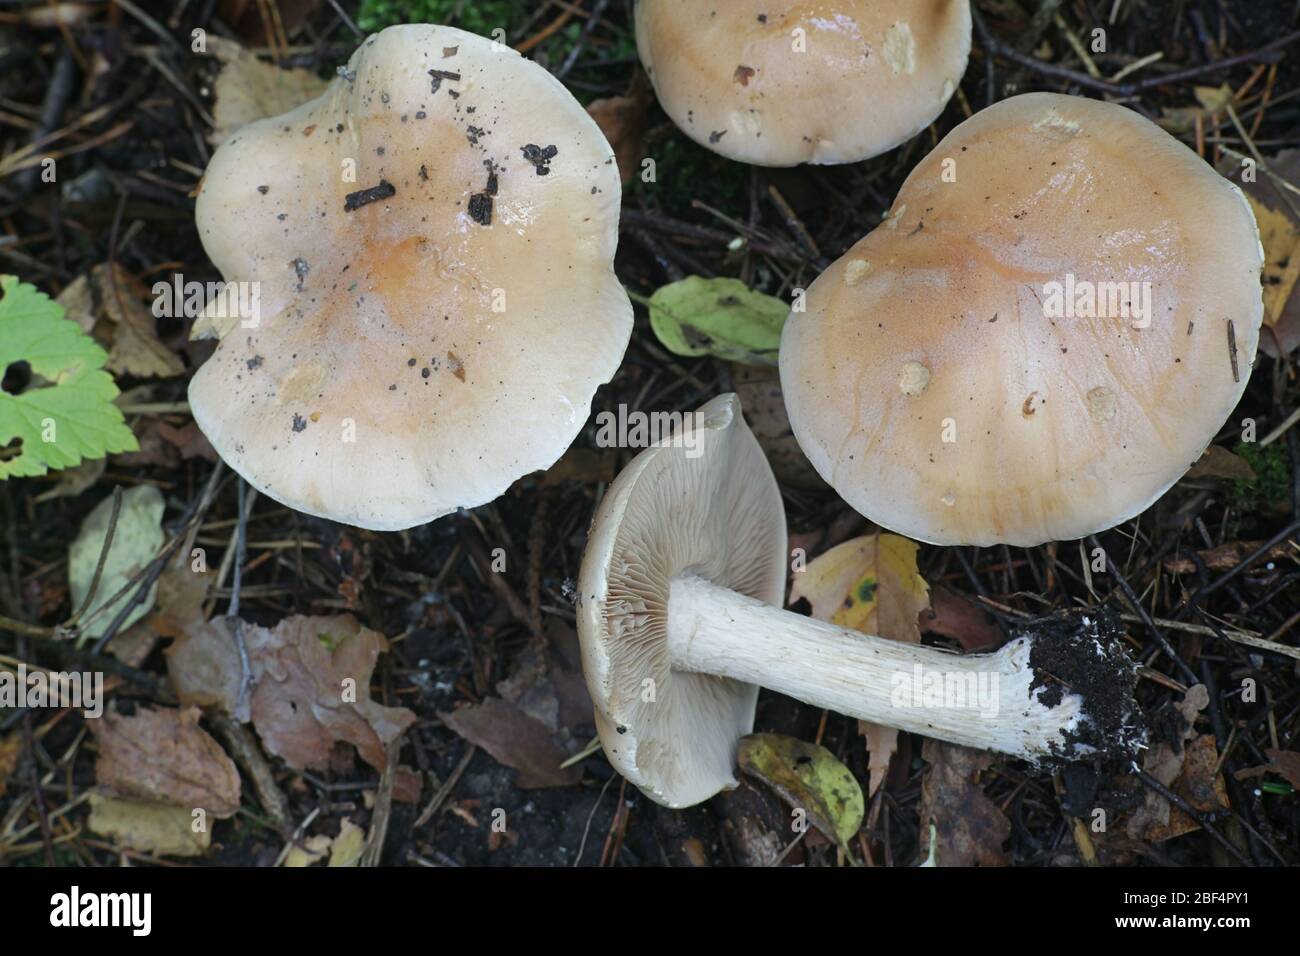 Hebeloma sinapizans, commonly known as the rough-stalked Hebeloma or bitter poisonpie, wild mushroom from Finland Stock Photo